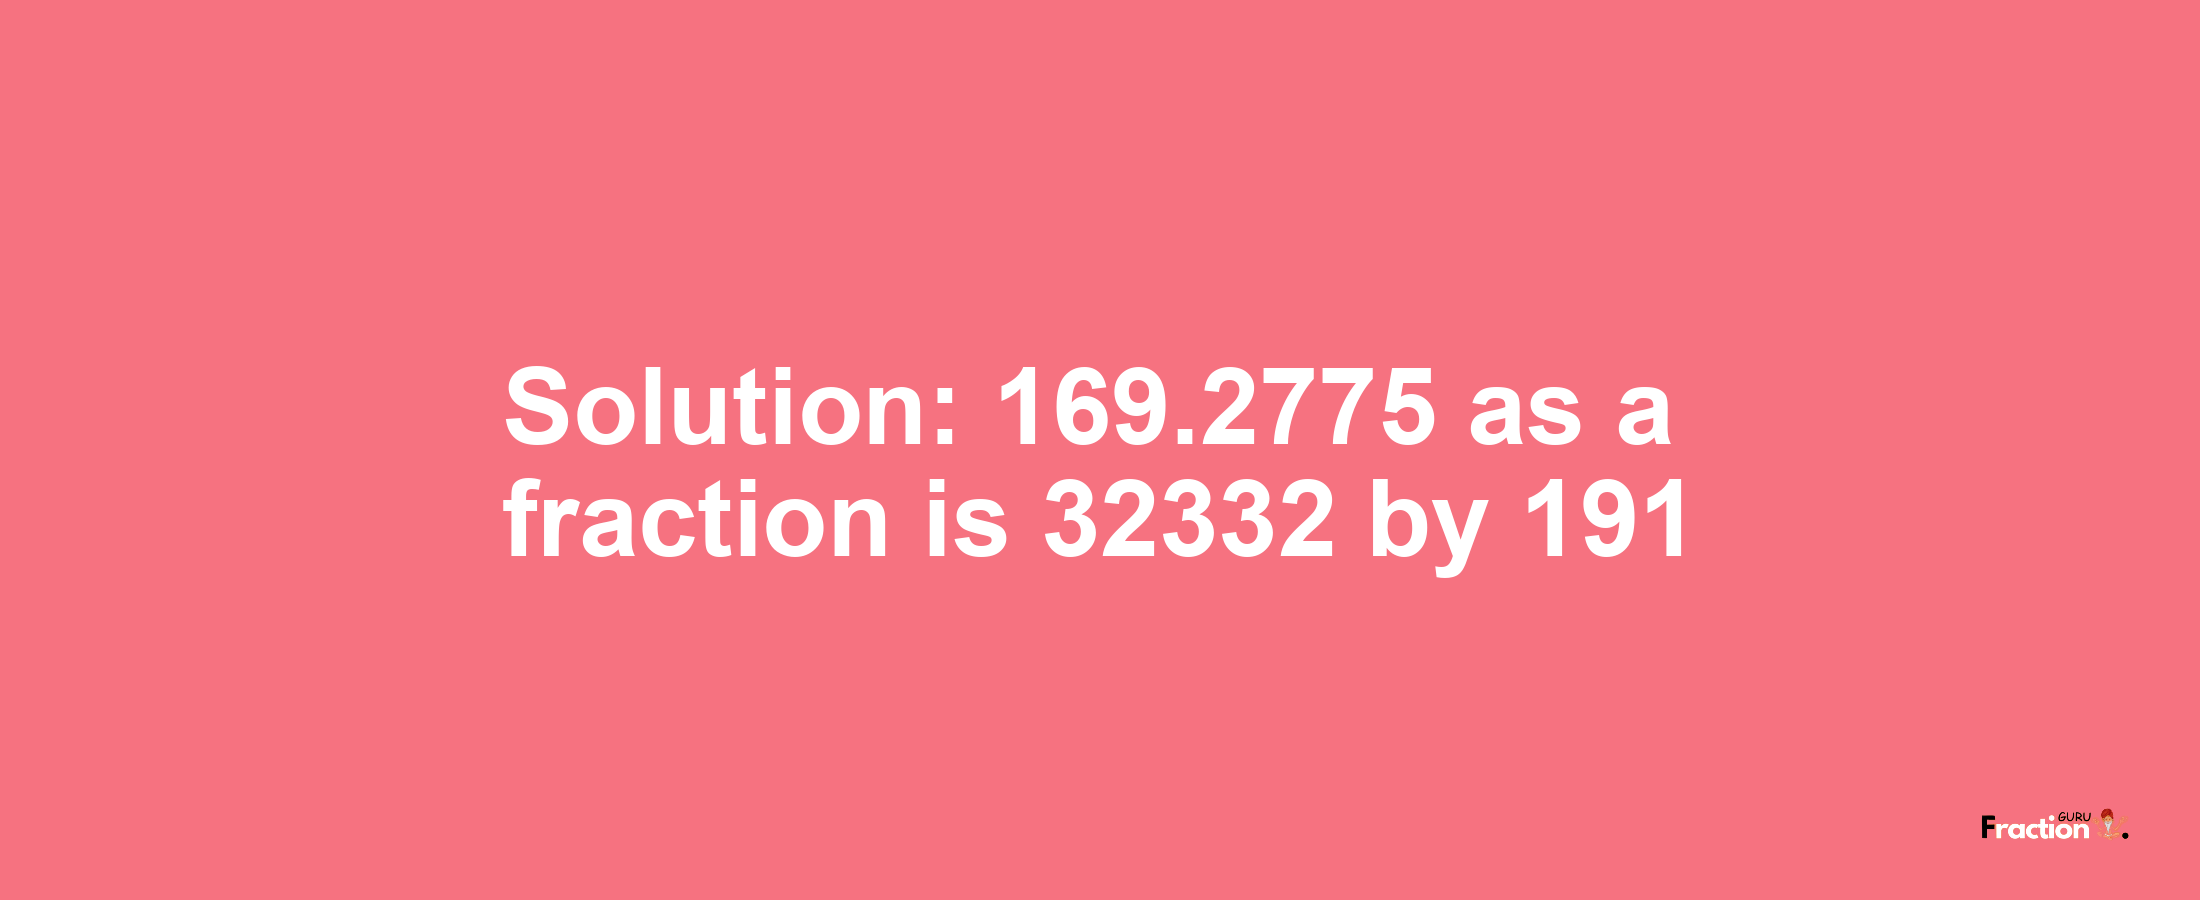 Solution:169.2775 as a fraction is 32332/191